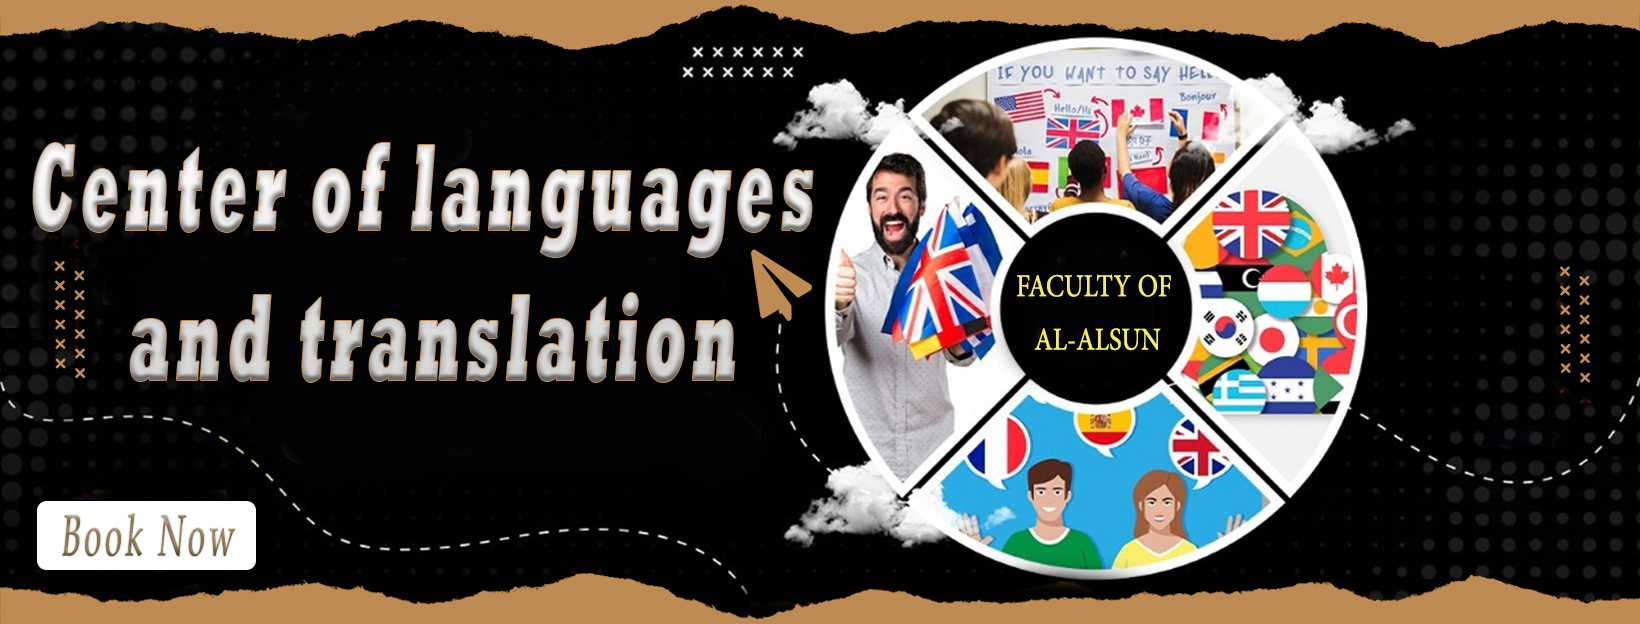 Center of languages and translation